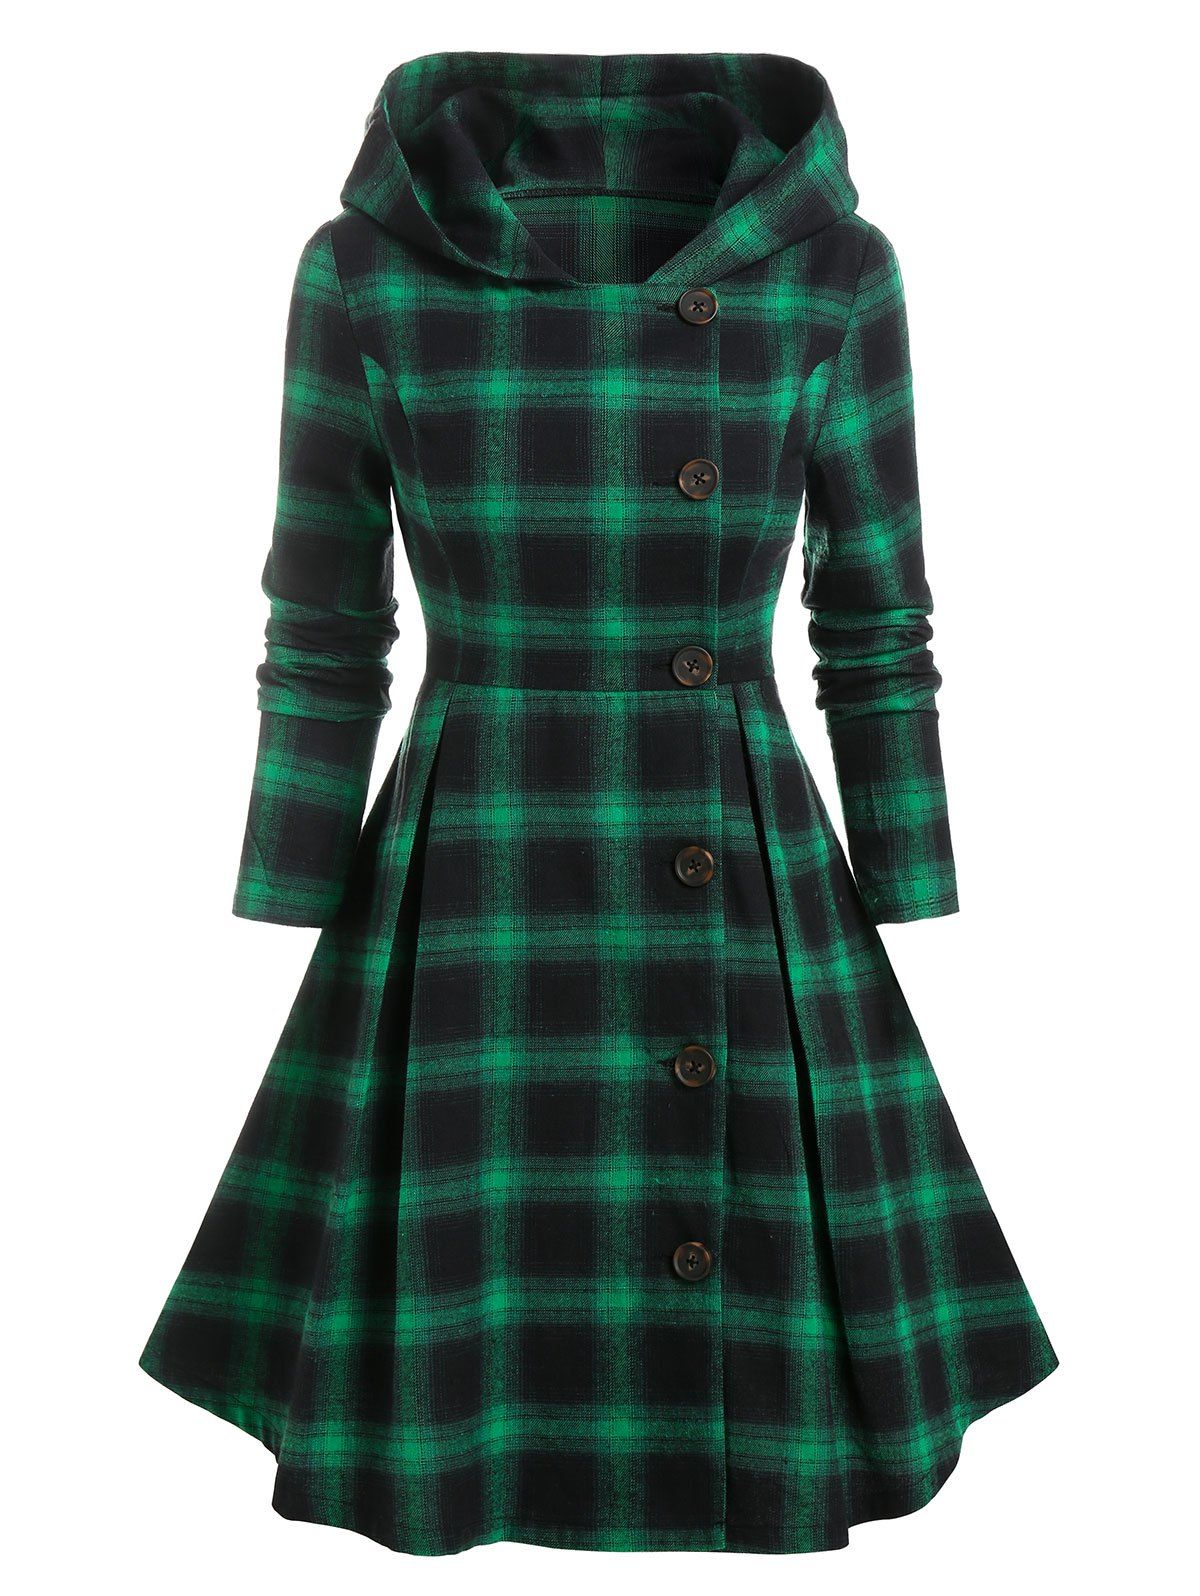 Hooded Single Breasted Plaid Skirted Coat - DEEP GREEN XL